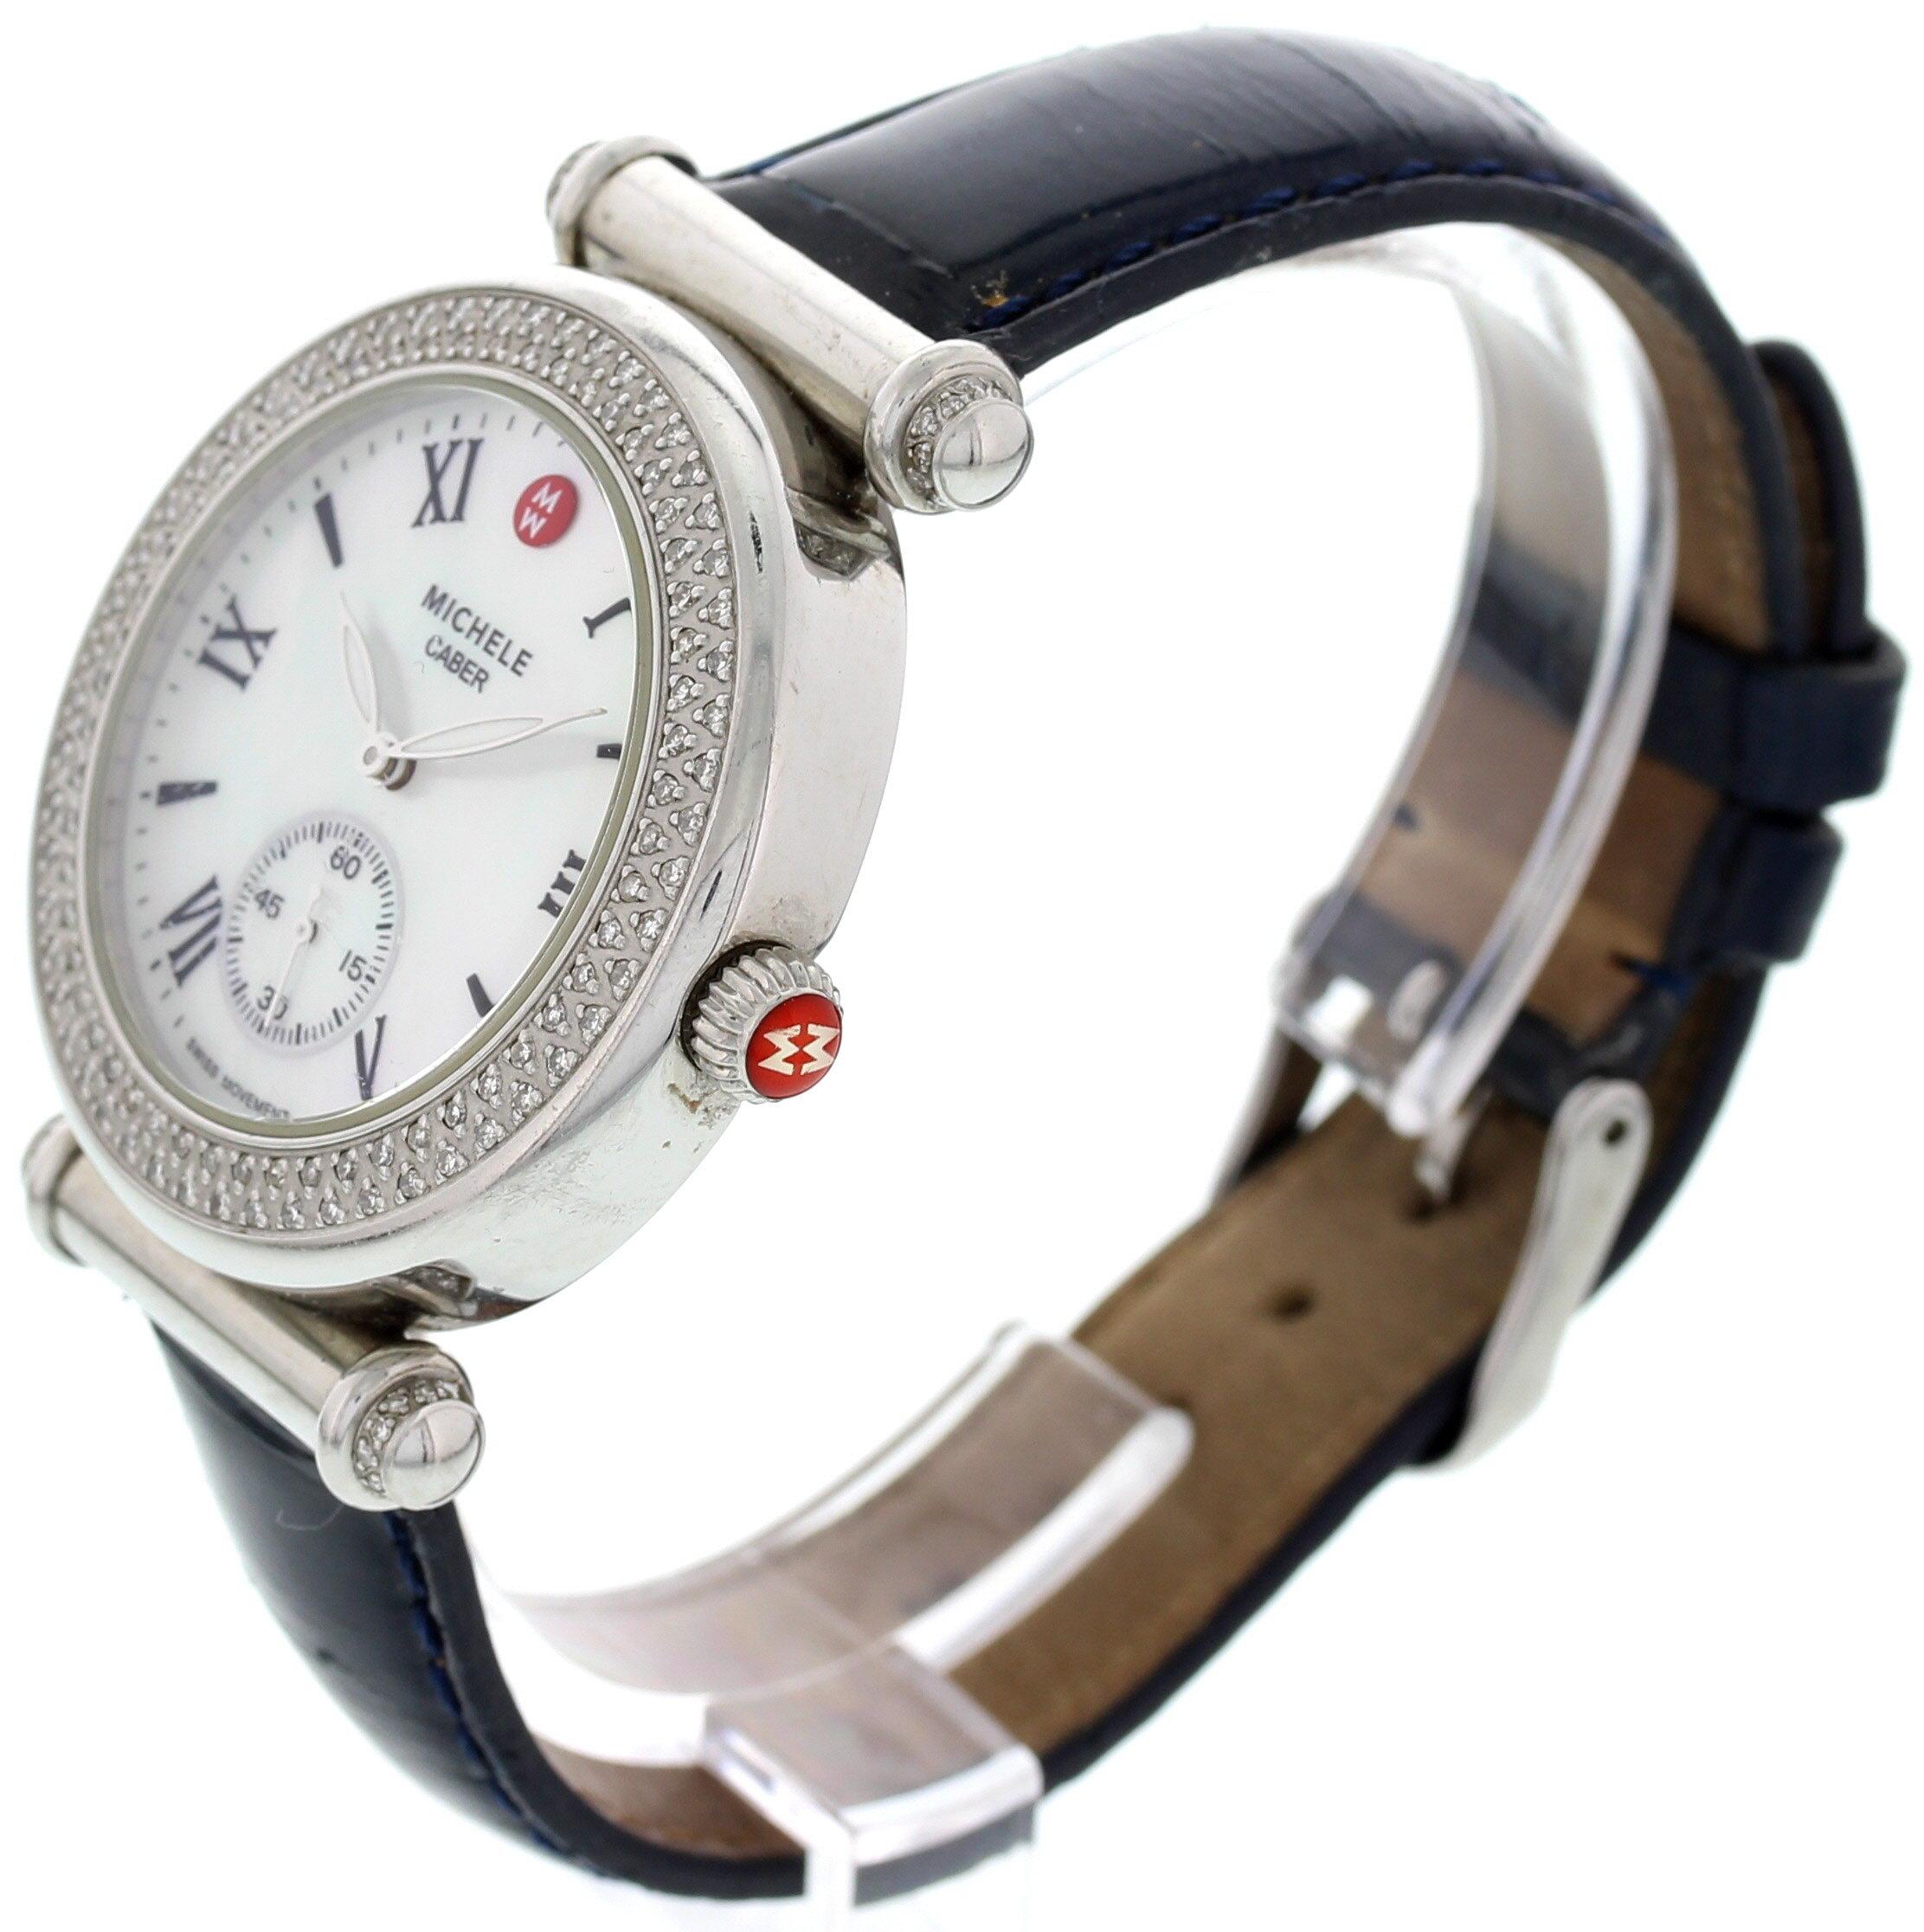 A ladies Michele Caber diamond bezel stainless steel watch with a seconds sub dial. The dial white mother pearl with roman numeral indexes. The band is an adjustable blue leather with a stainless steel buckle. Quartz movement.
